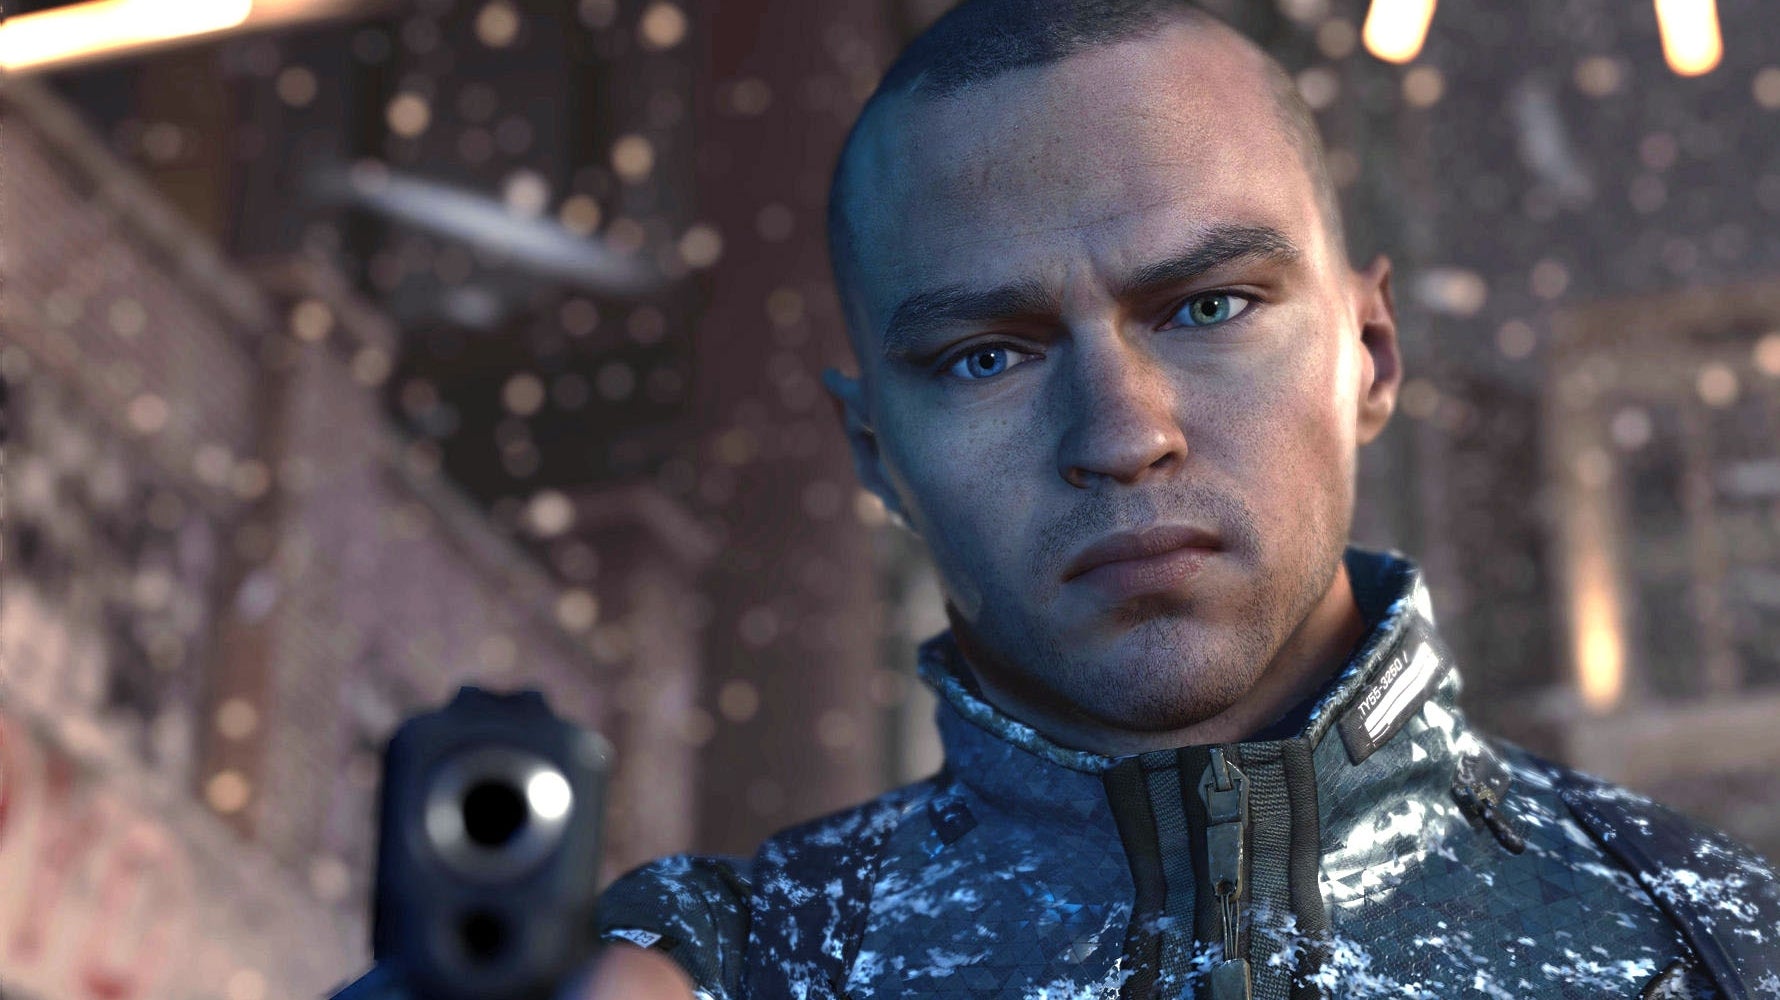 Image for Detroit: Become Human is a different kind of tech showcase